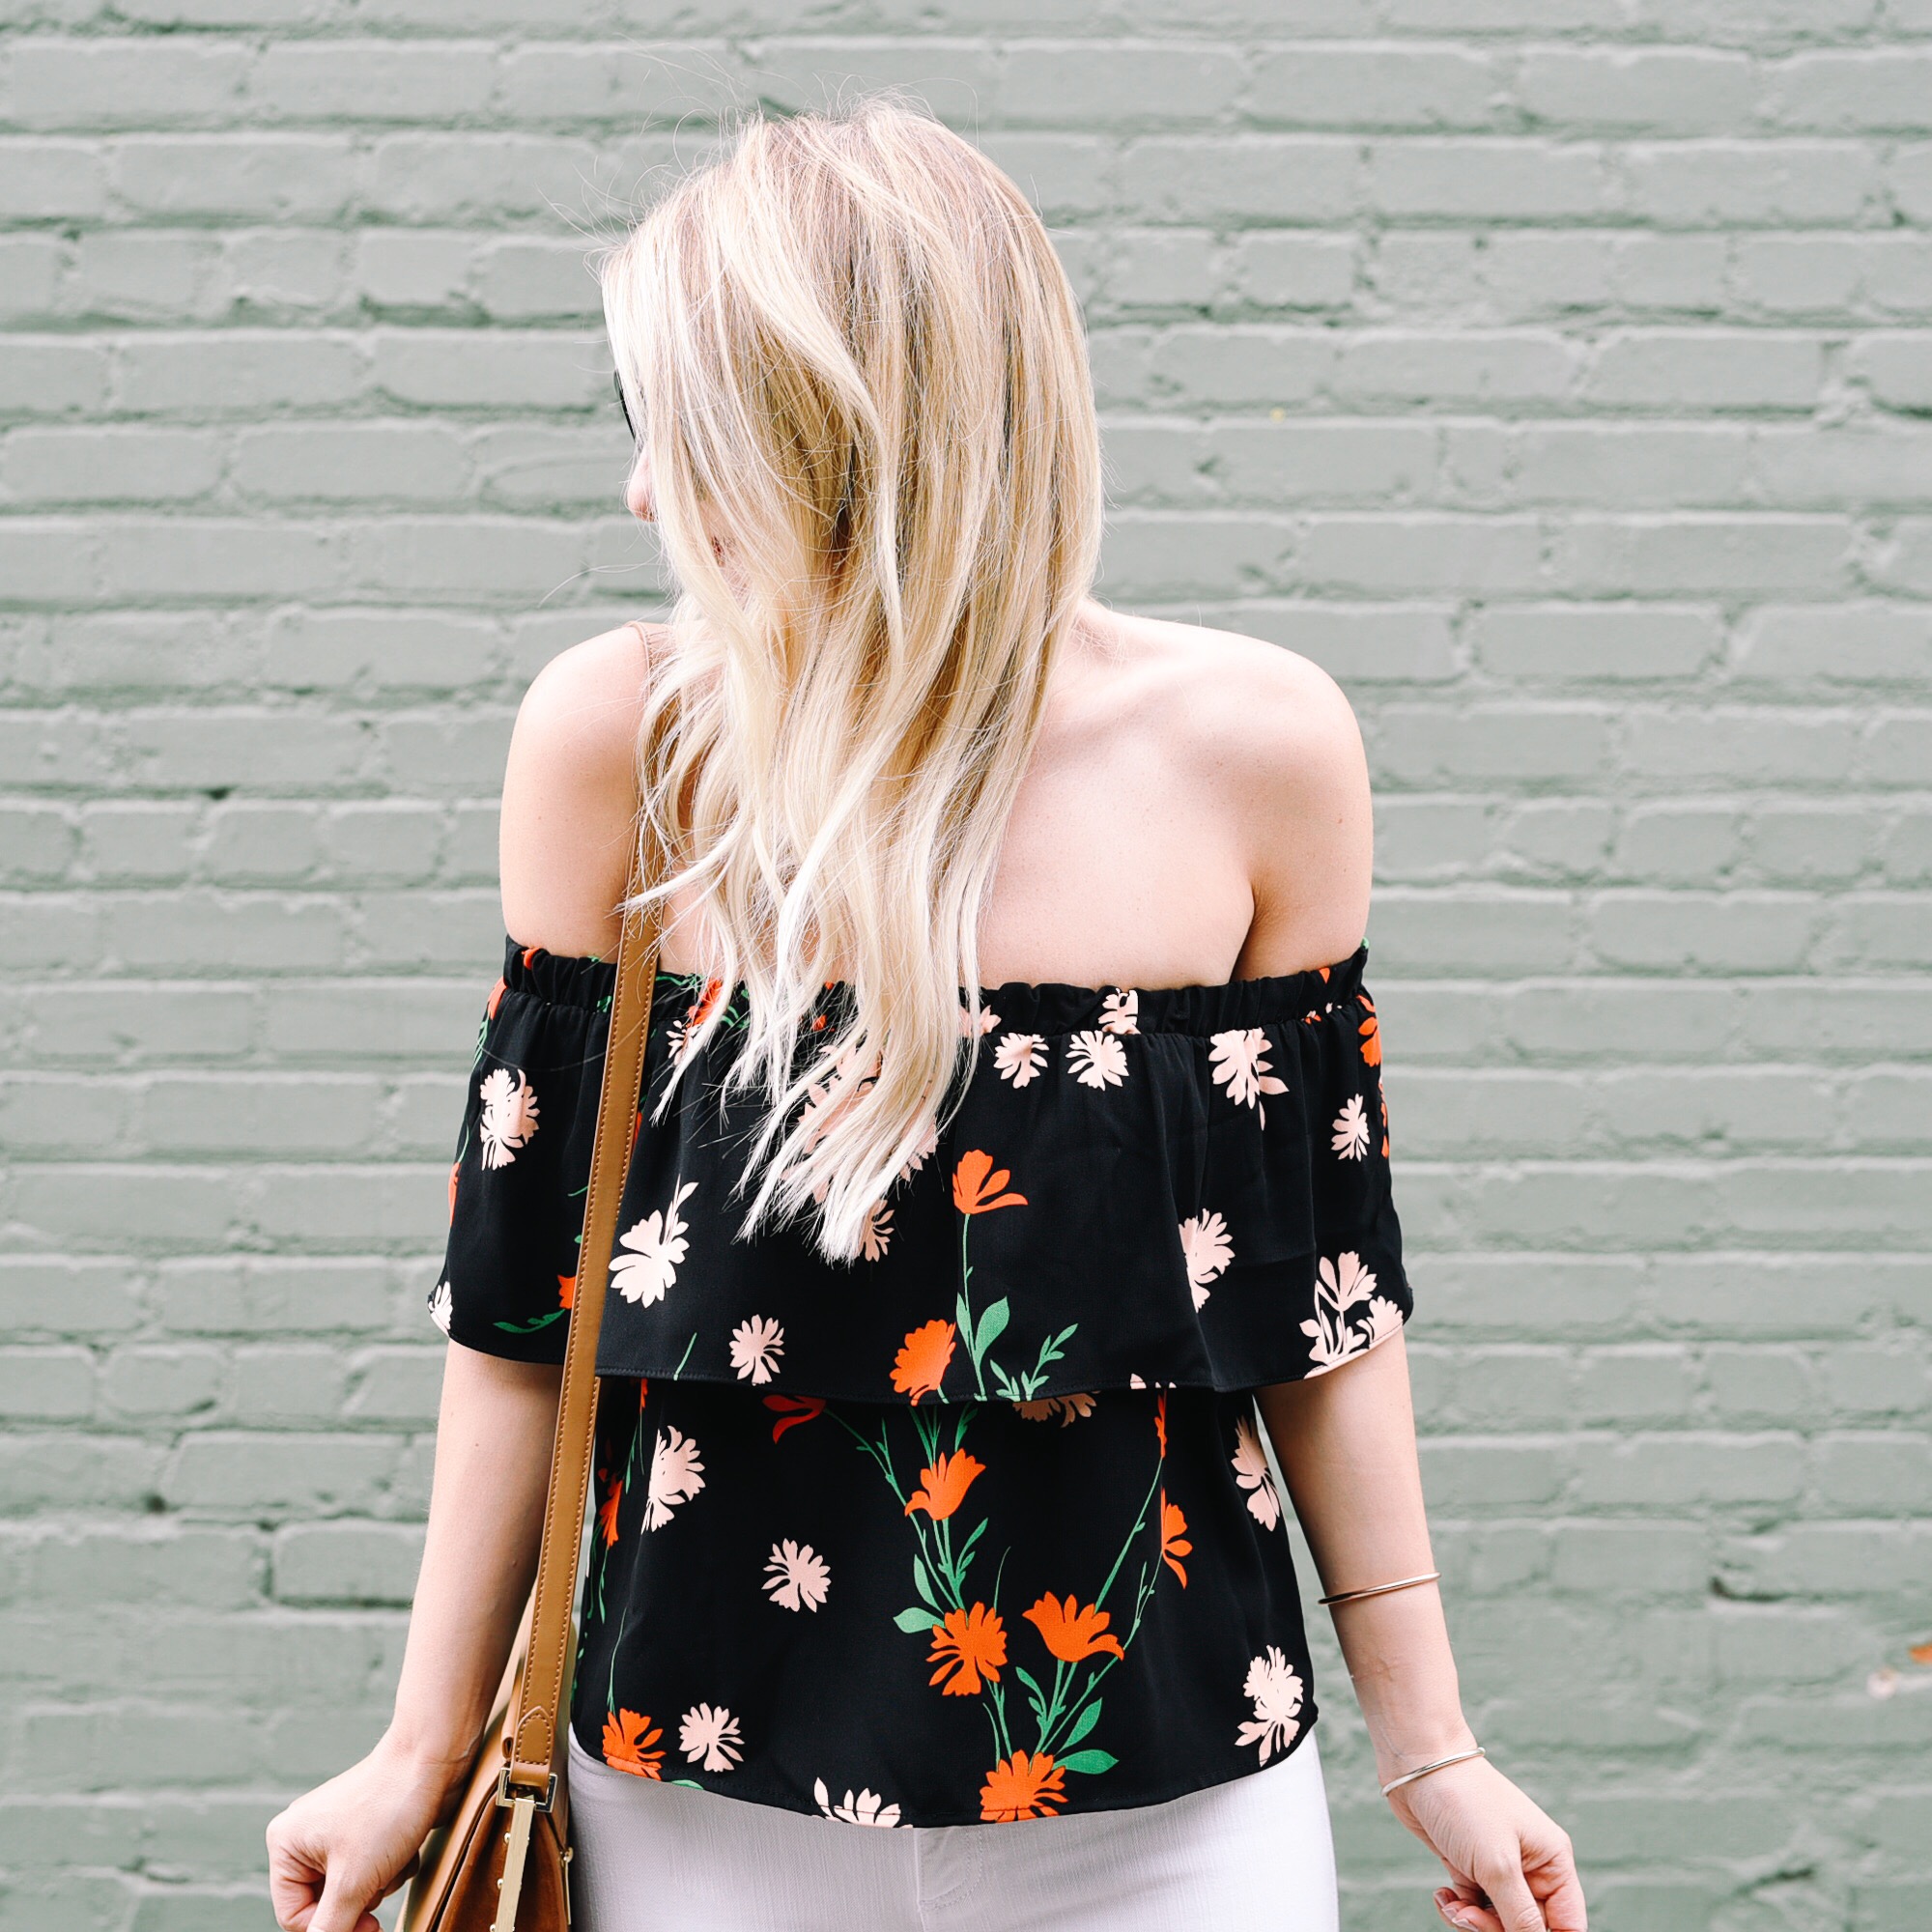 Off the shoulder floral top! Love this flirty piece! 